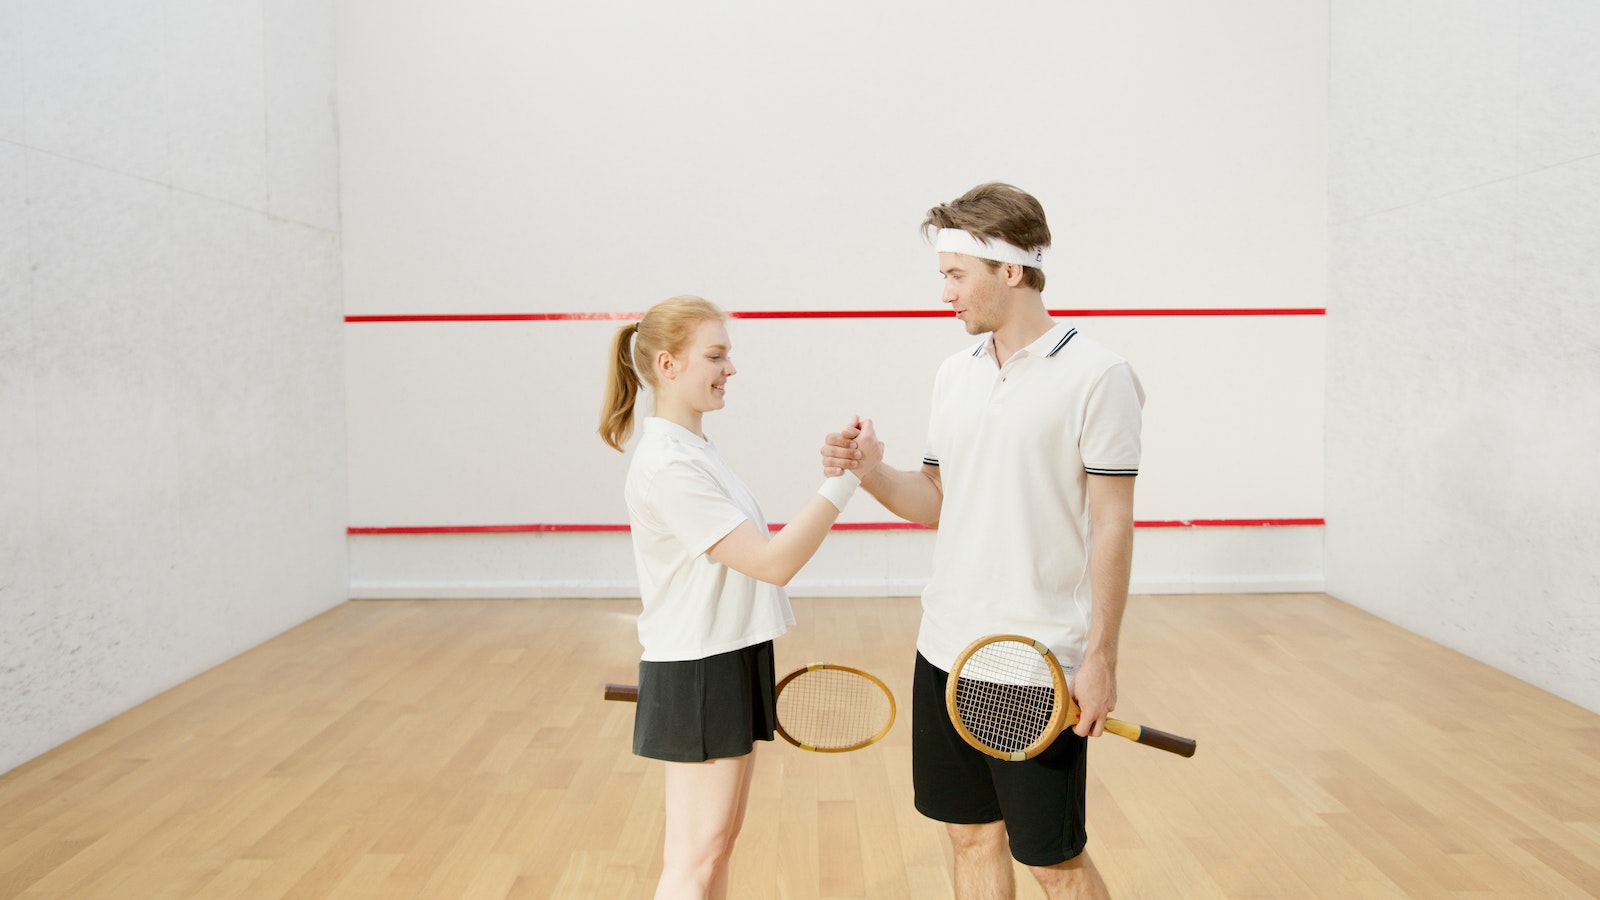 Squash Players Holding Hands on the Court